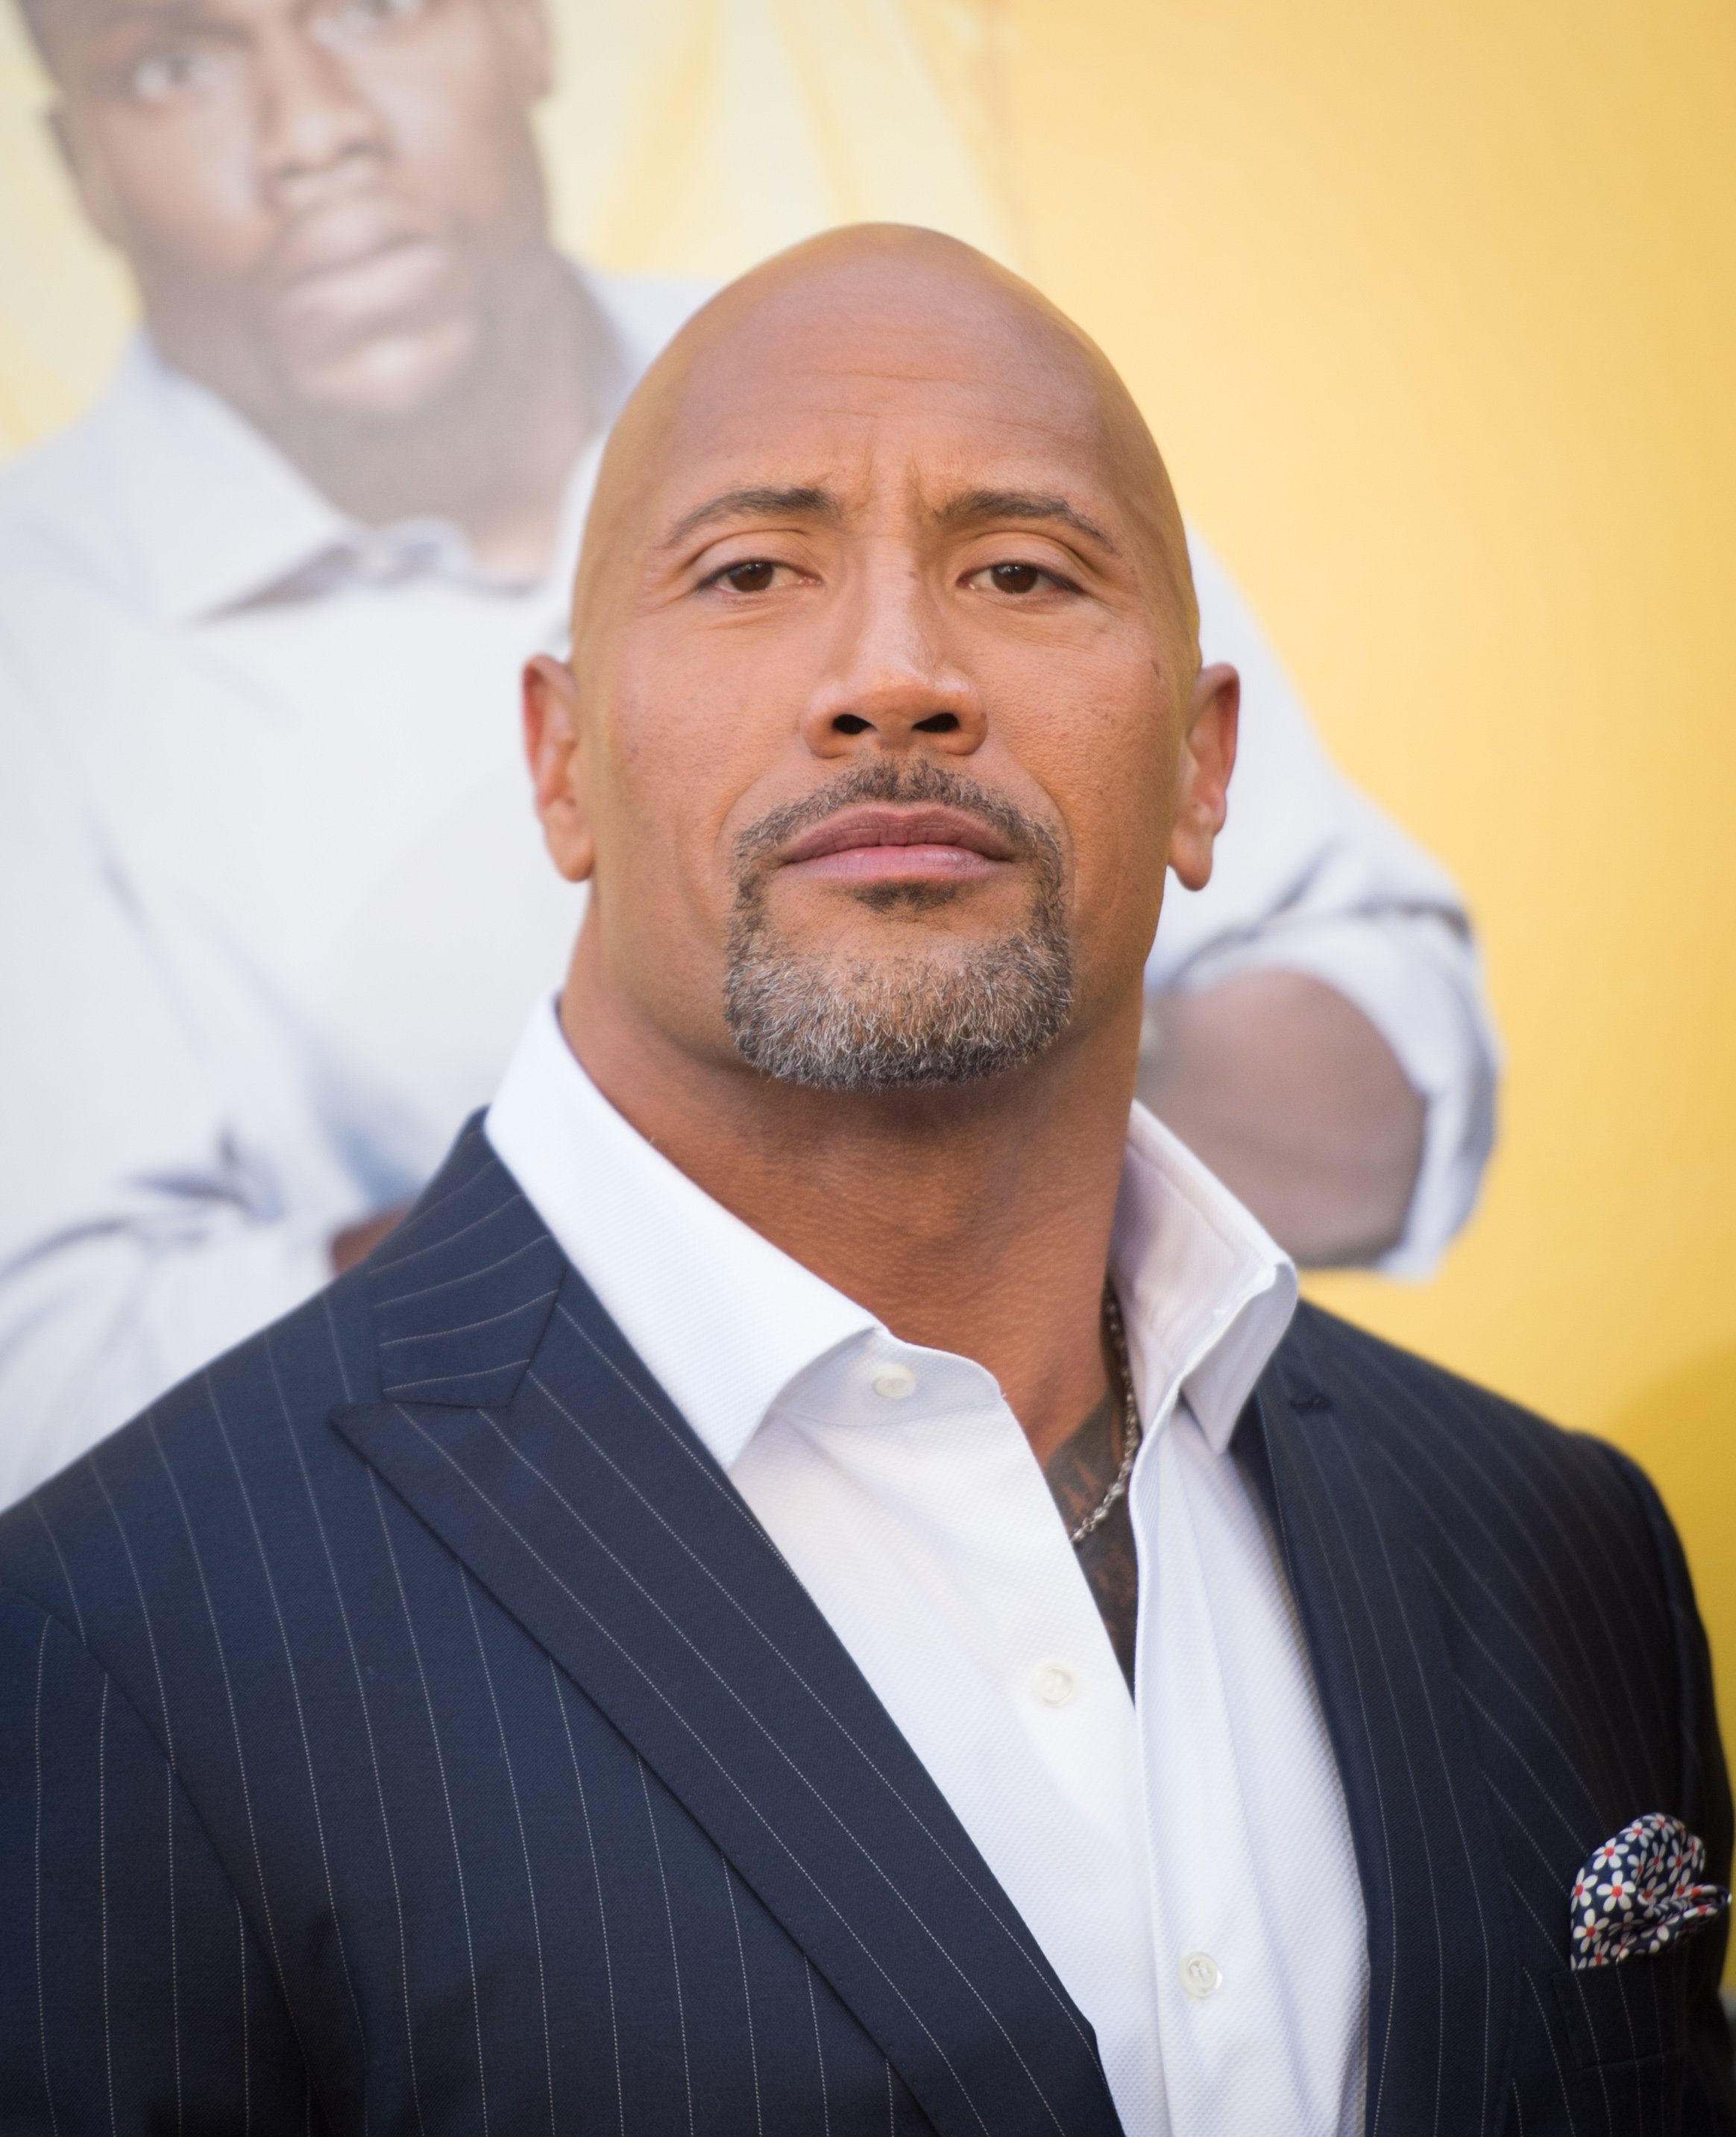 Dwayne Johnson attends the premiere of Warner Bros. Pictures' "Central Intelligence" at Westwood Village Theatre on June 10, 2016 in Westwood, California | Photo: Getty Images